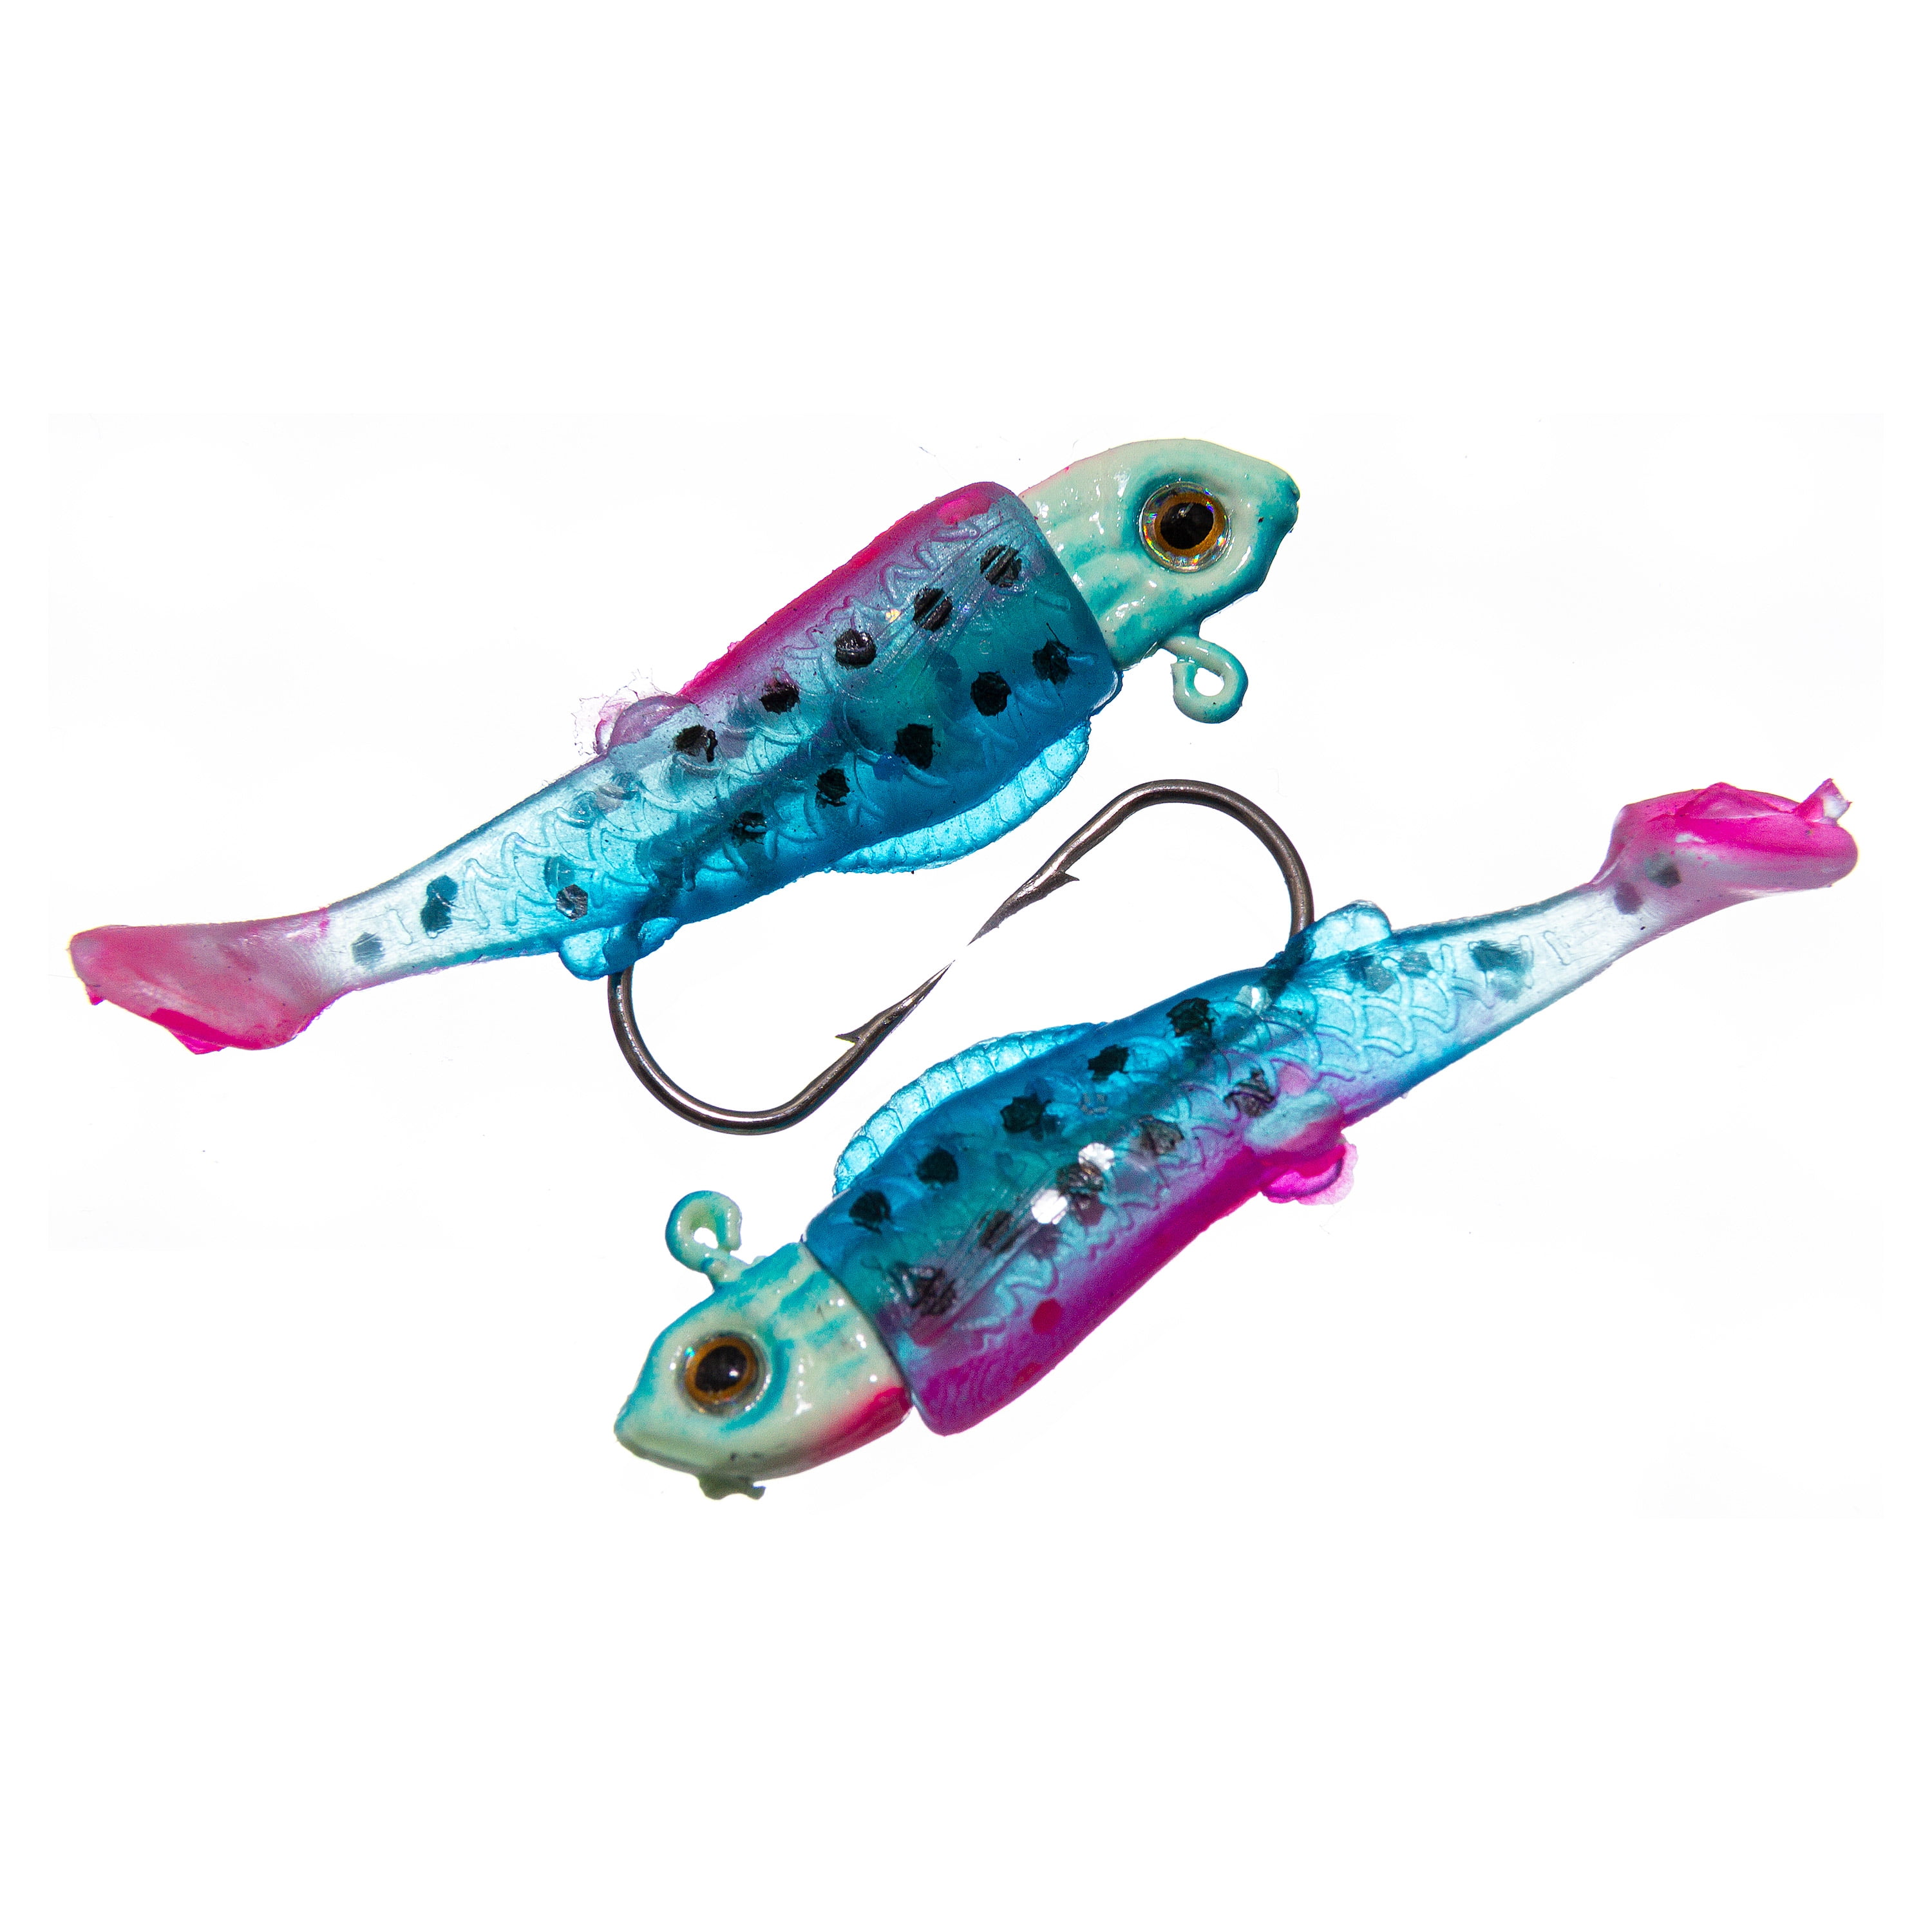 Ozark Trail 1/32 Ounce Blue/Pink Rigged Panfish Minnow Fishing Lure, 2 Pack